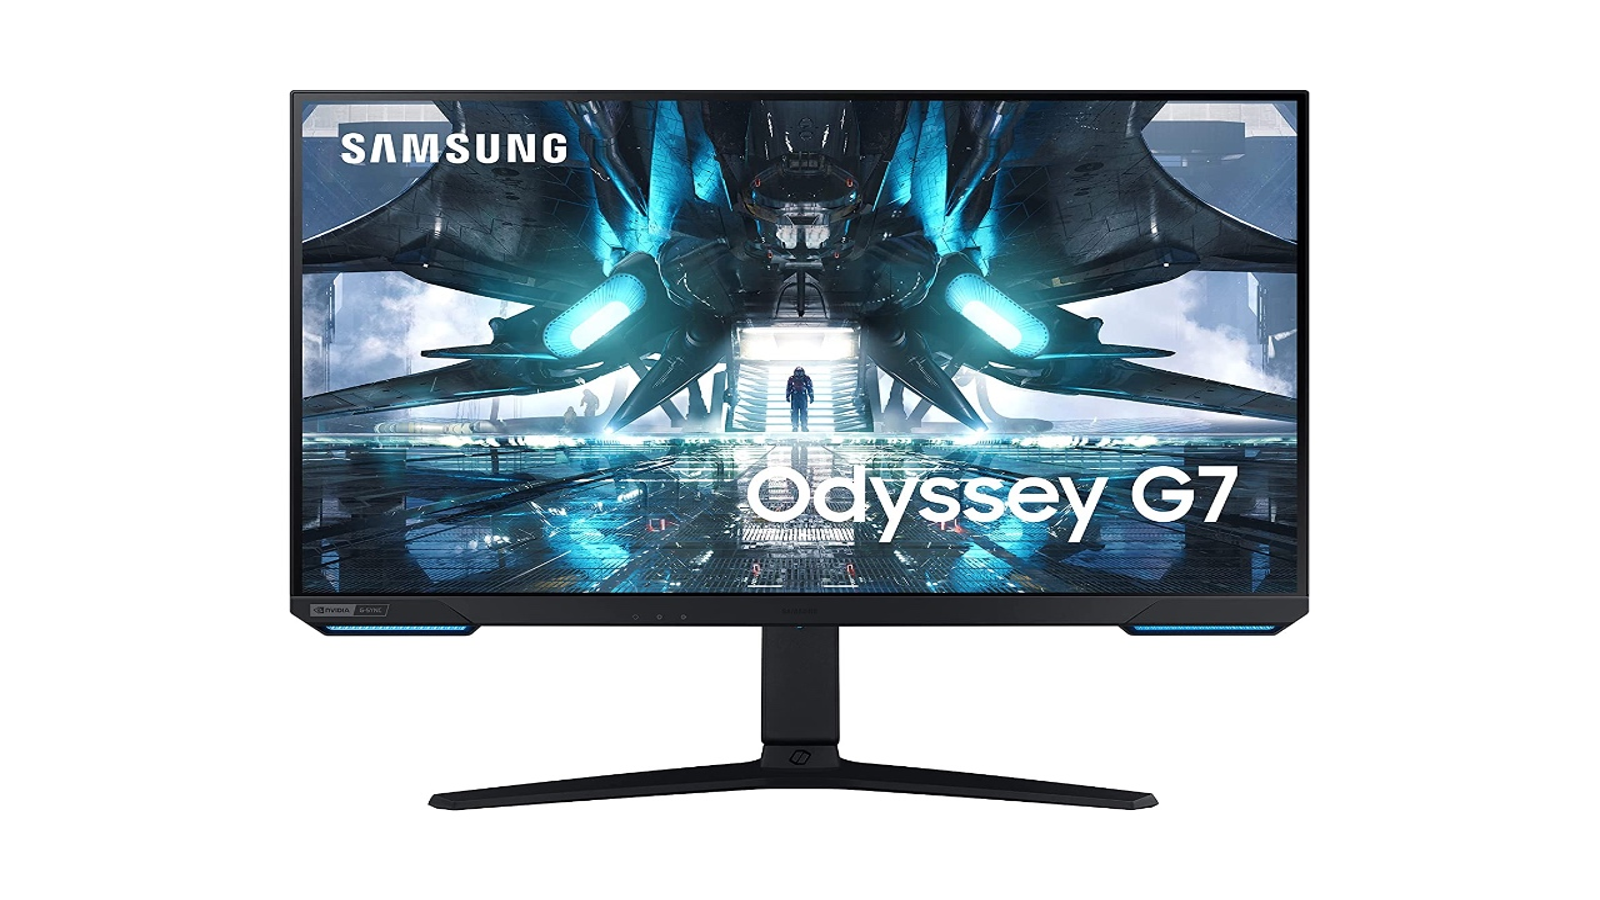 Samsung's Odyssey G7 Was So Close To Being The Best Monitor